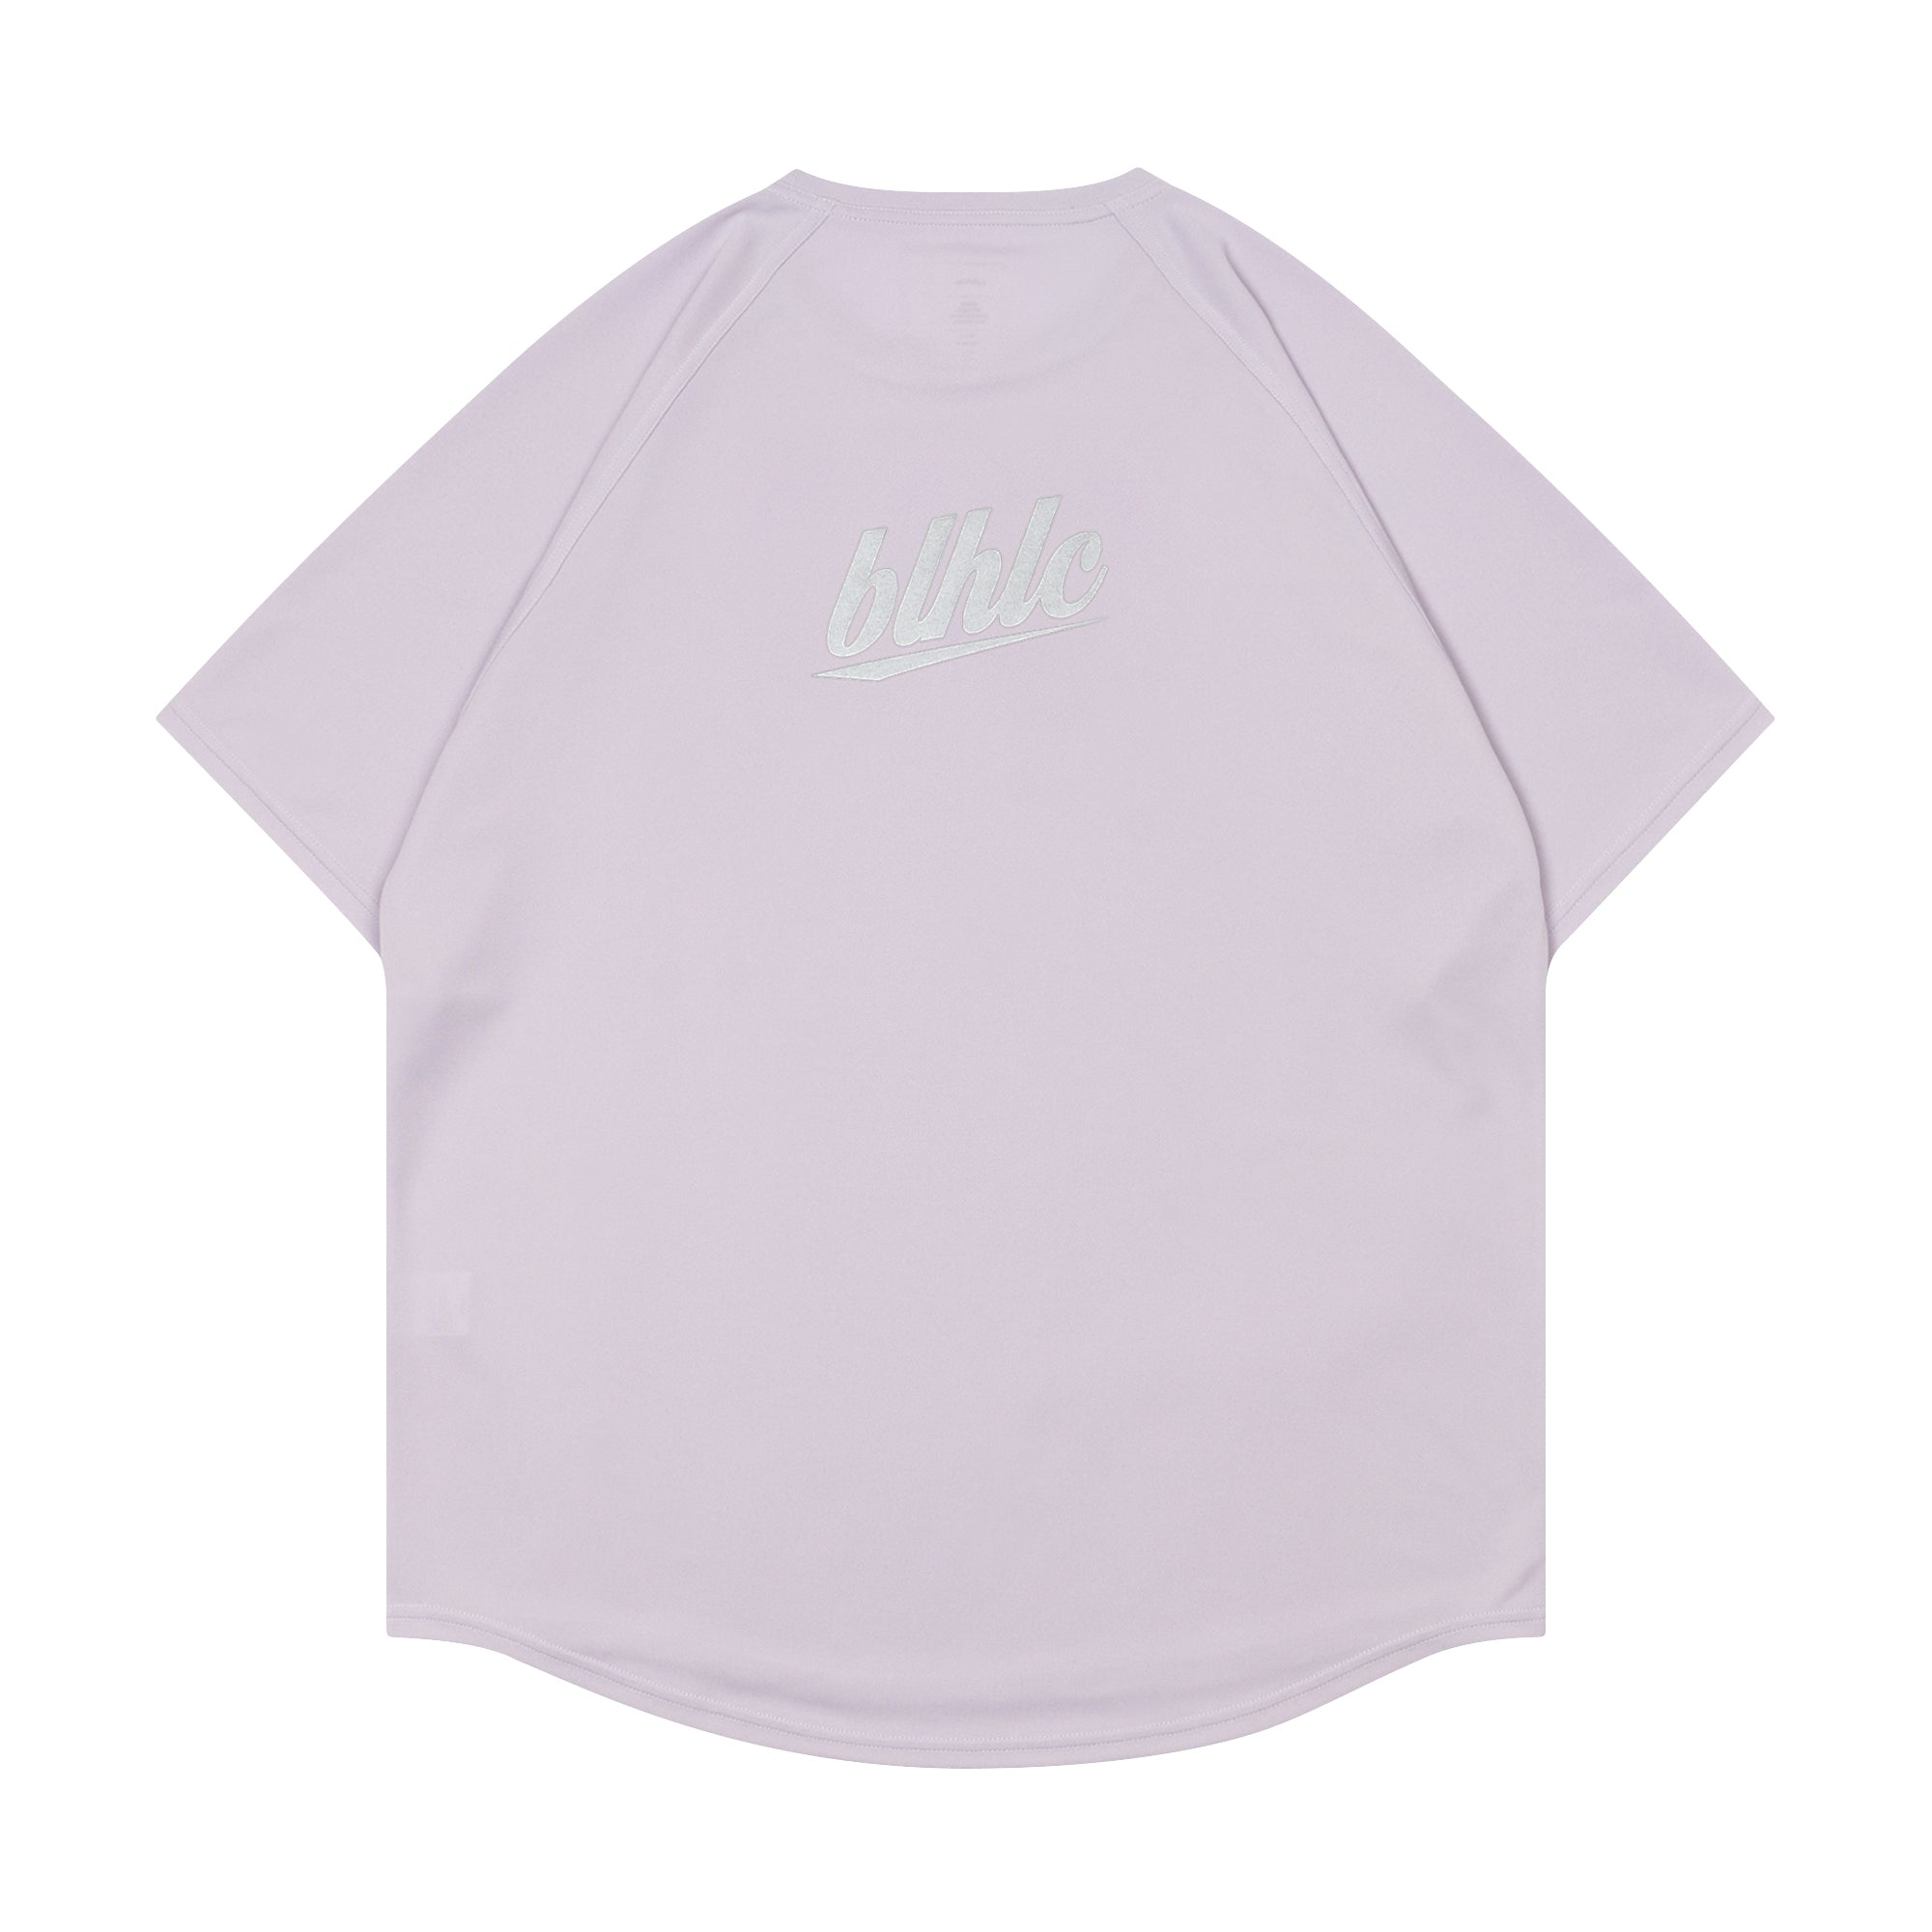 ballaholic blhlc TOKYO cool tee 3枚セット - その他スポーツ